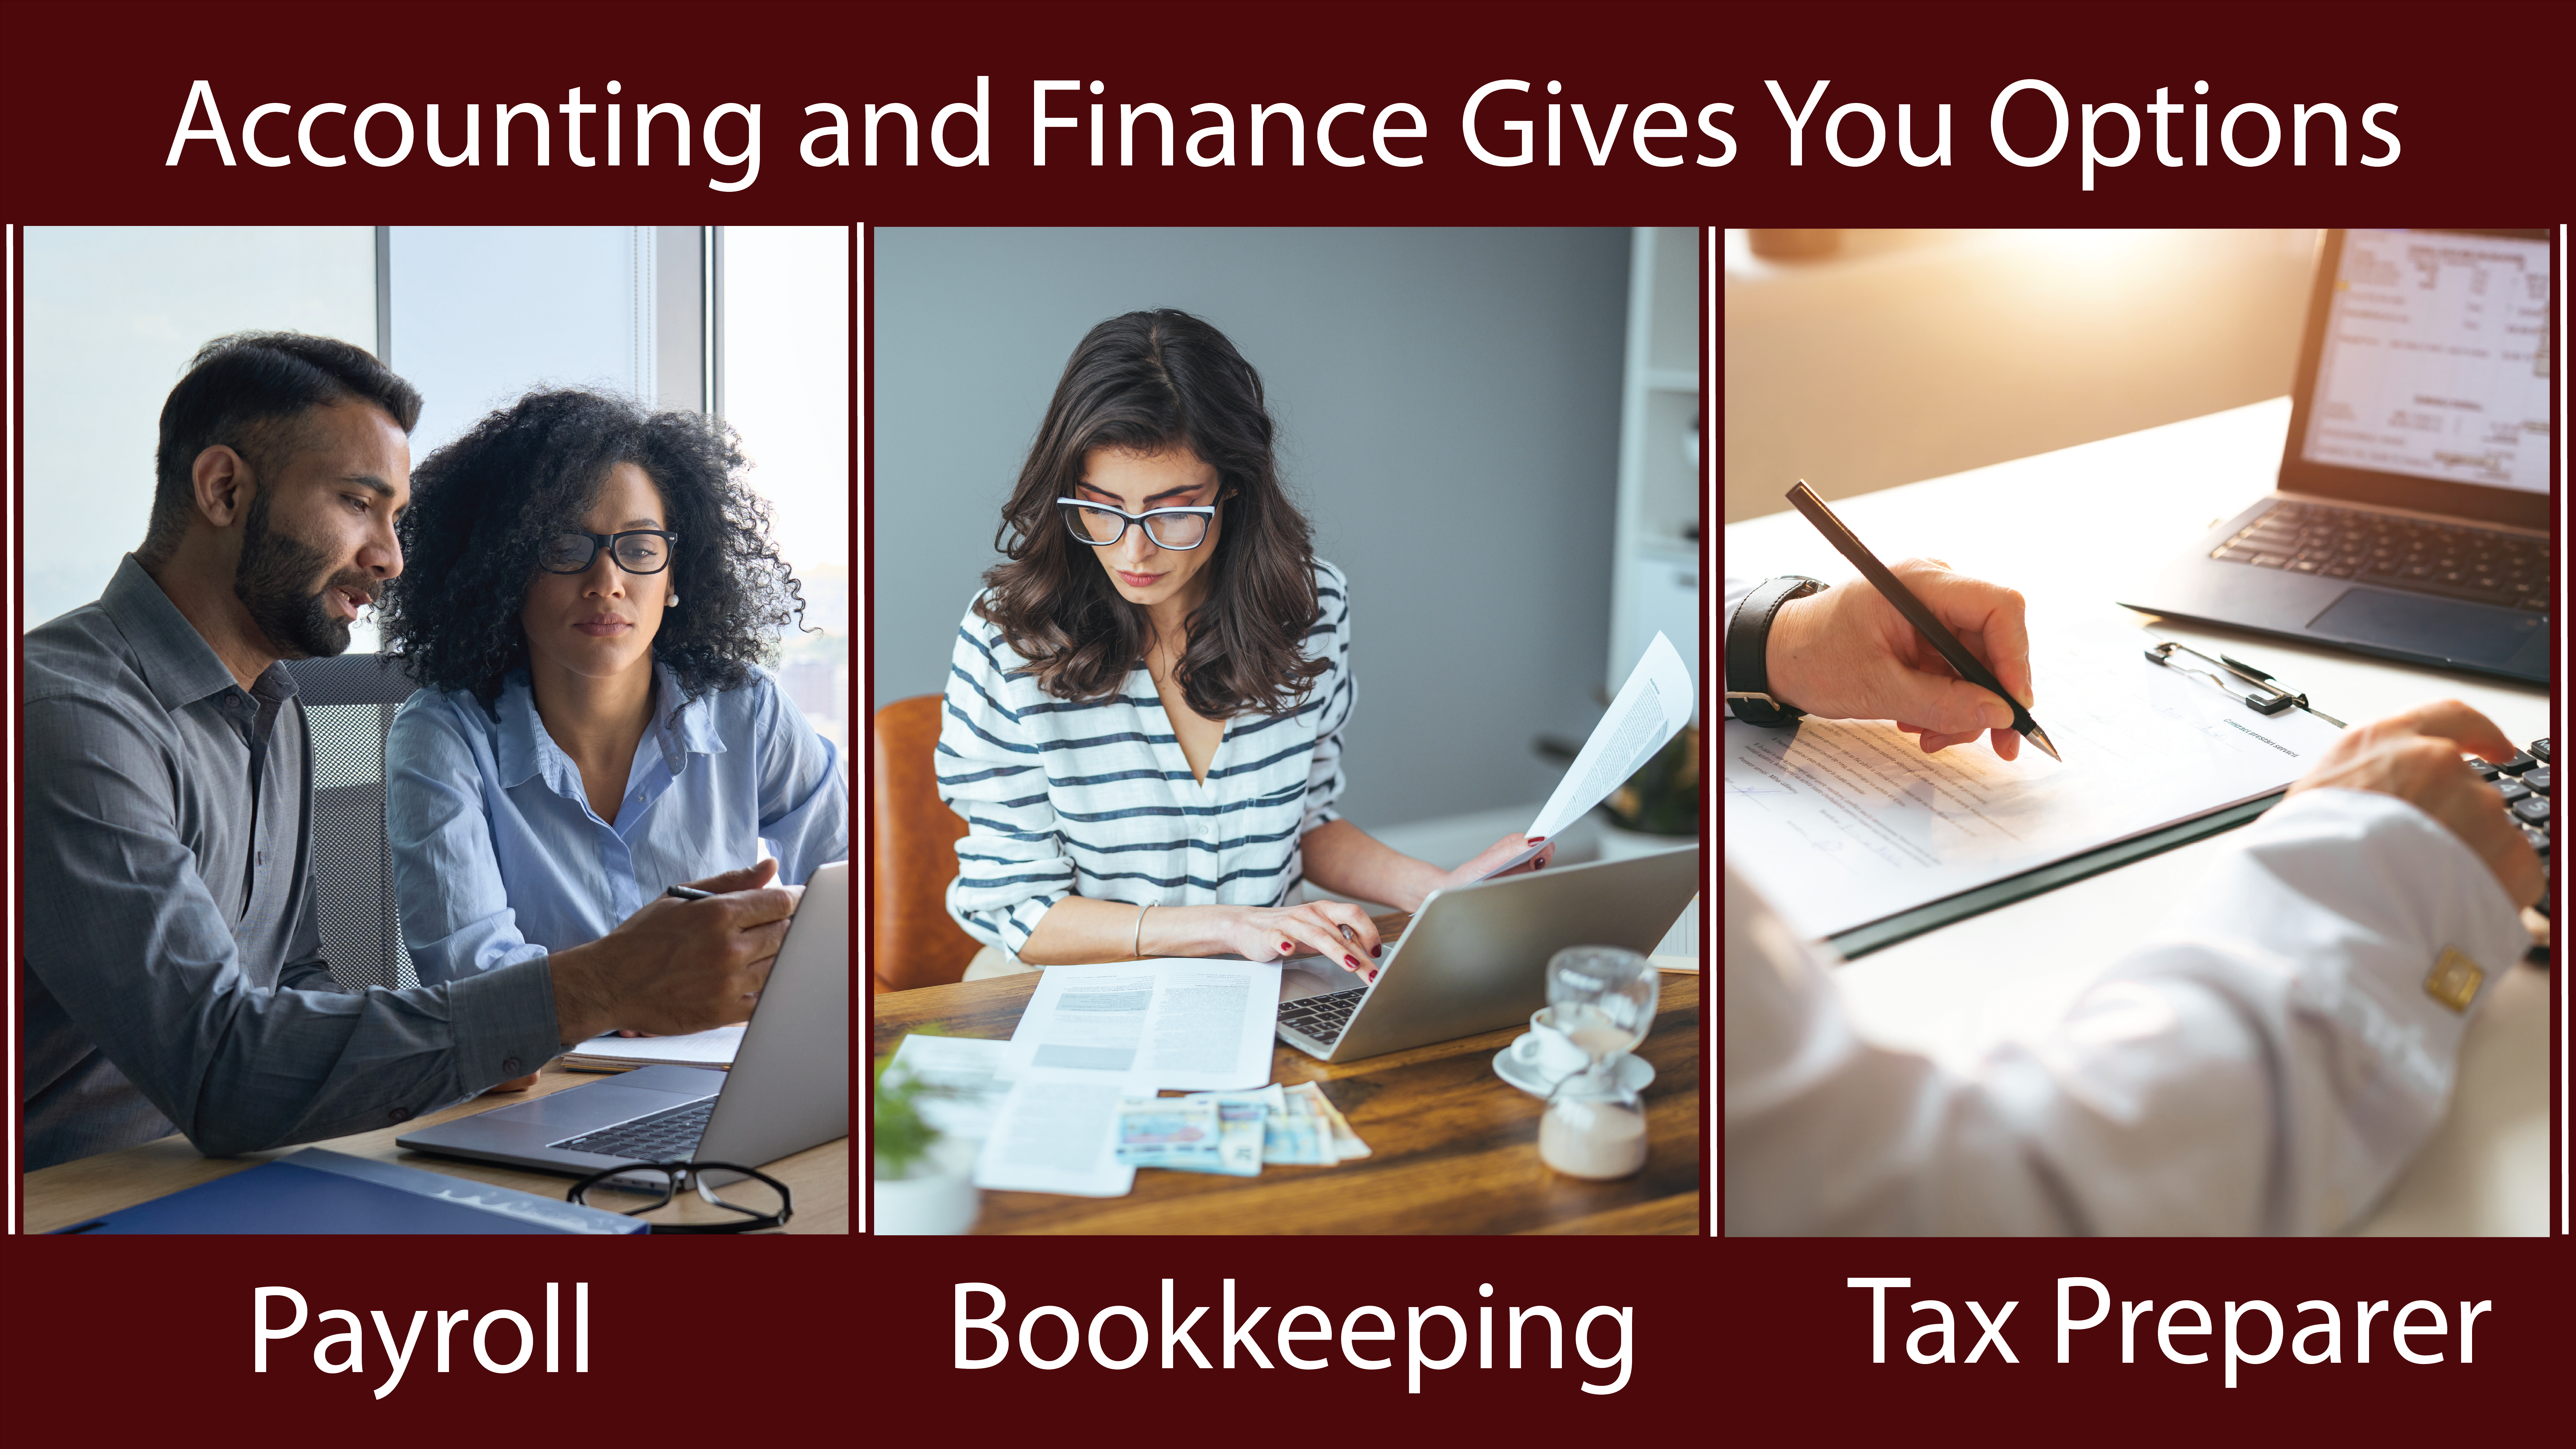 Picture of three people working in the areas of payroll, bookkeeping and tax preparer. The words Accounting and Finance Gives You Options at the top of the image.